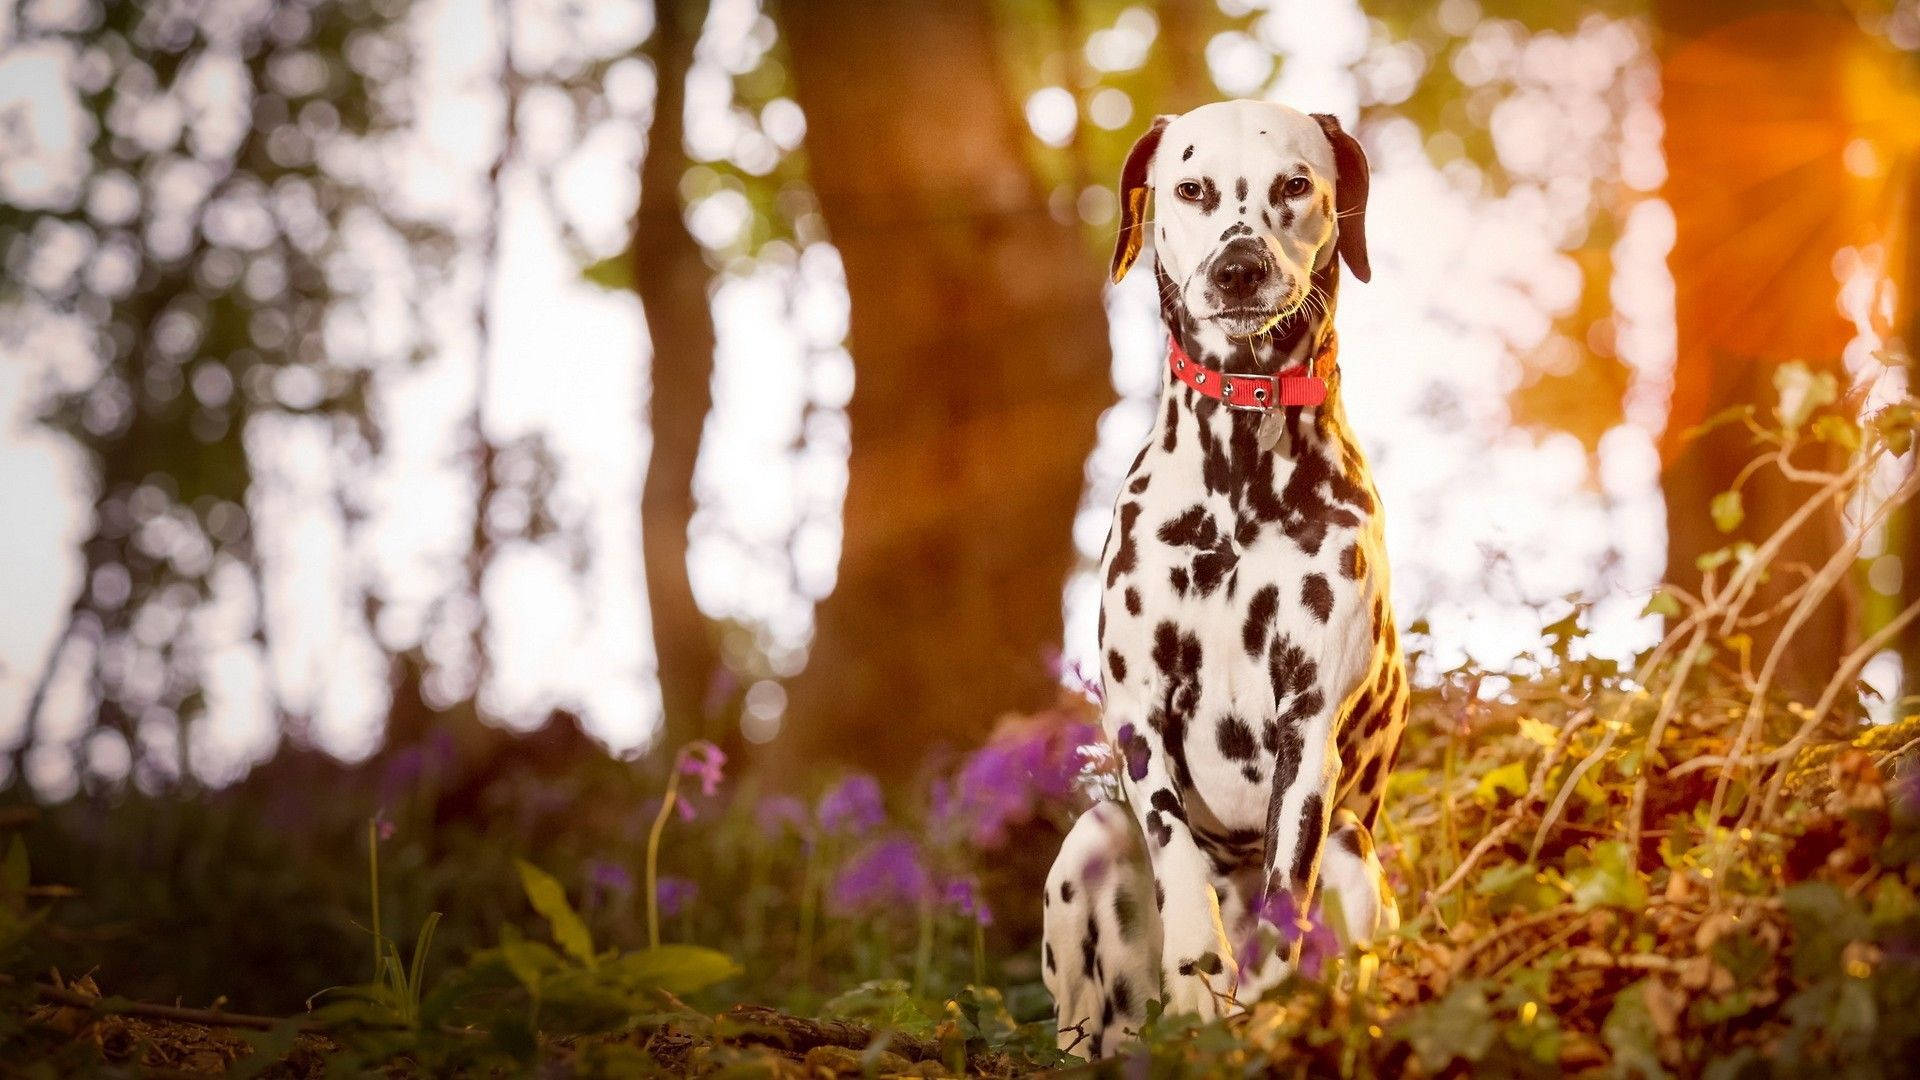 Dalmatian Dog In Magical Forest